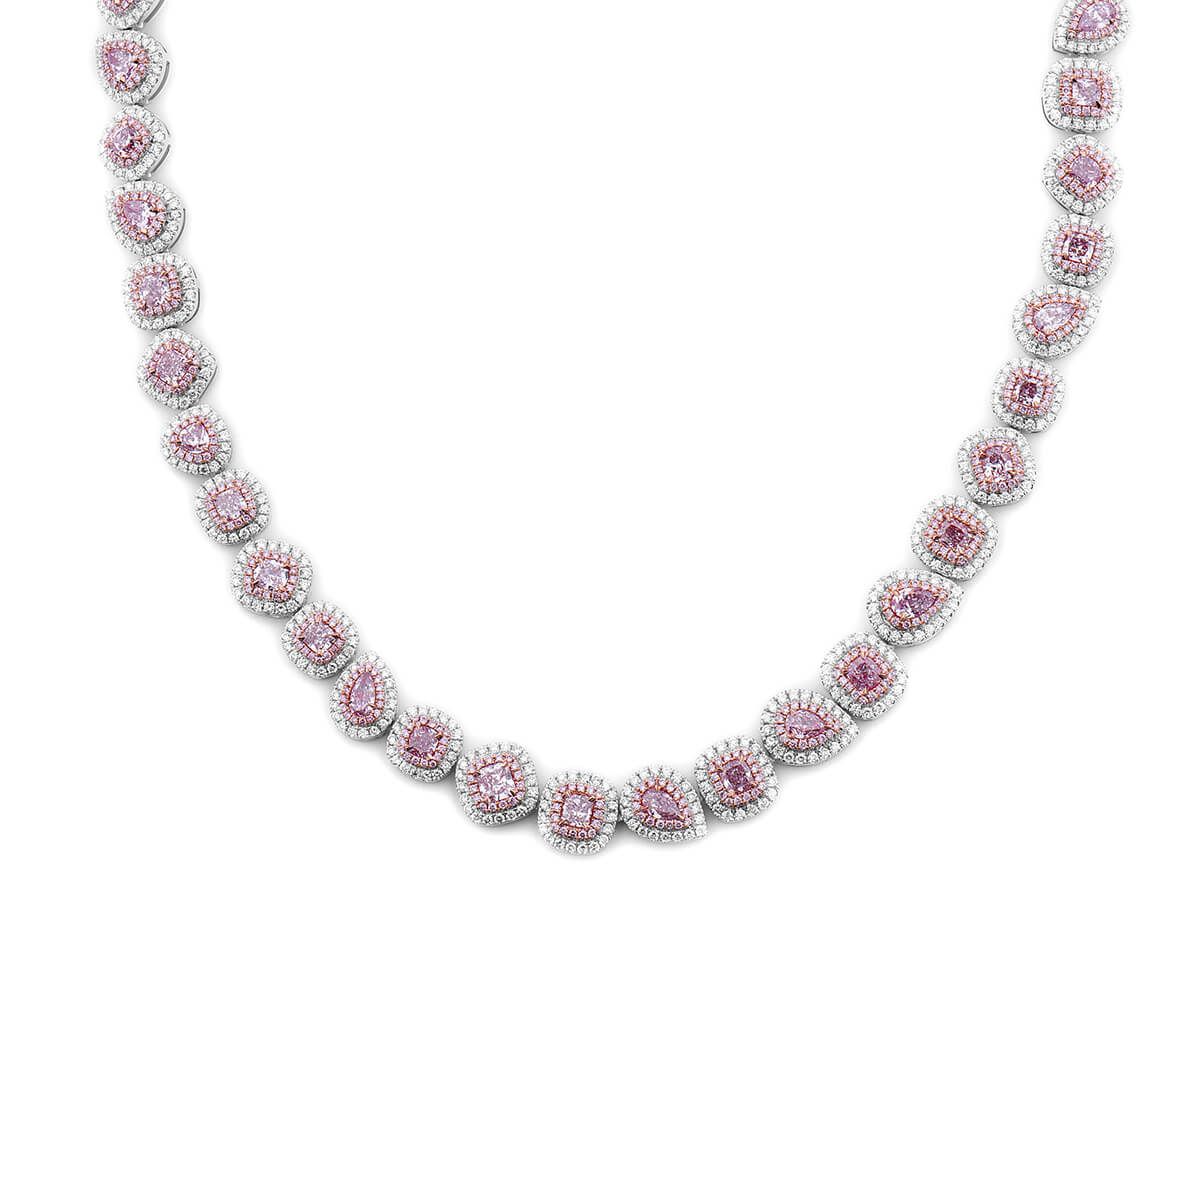 Very Light Pink Diamond Necklace, 17.40 Ct. TW, Mix shape, GIA Certified, JCNF05396001